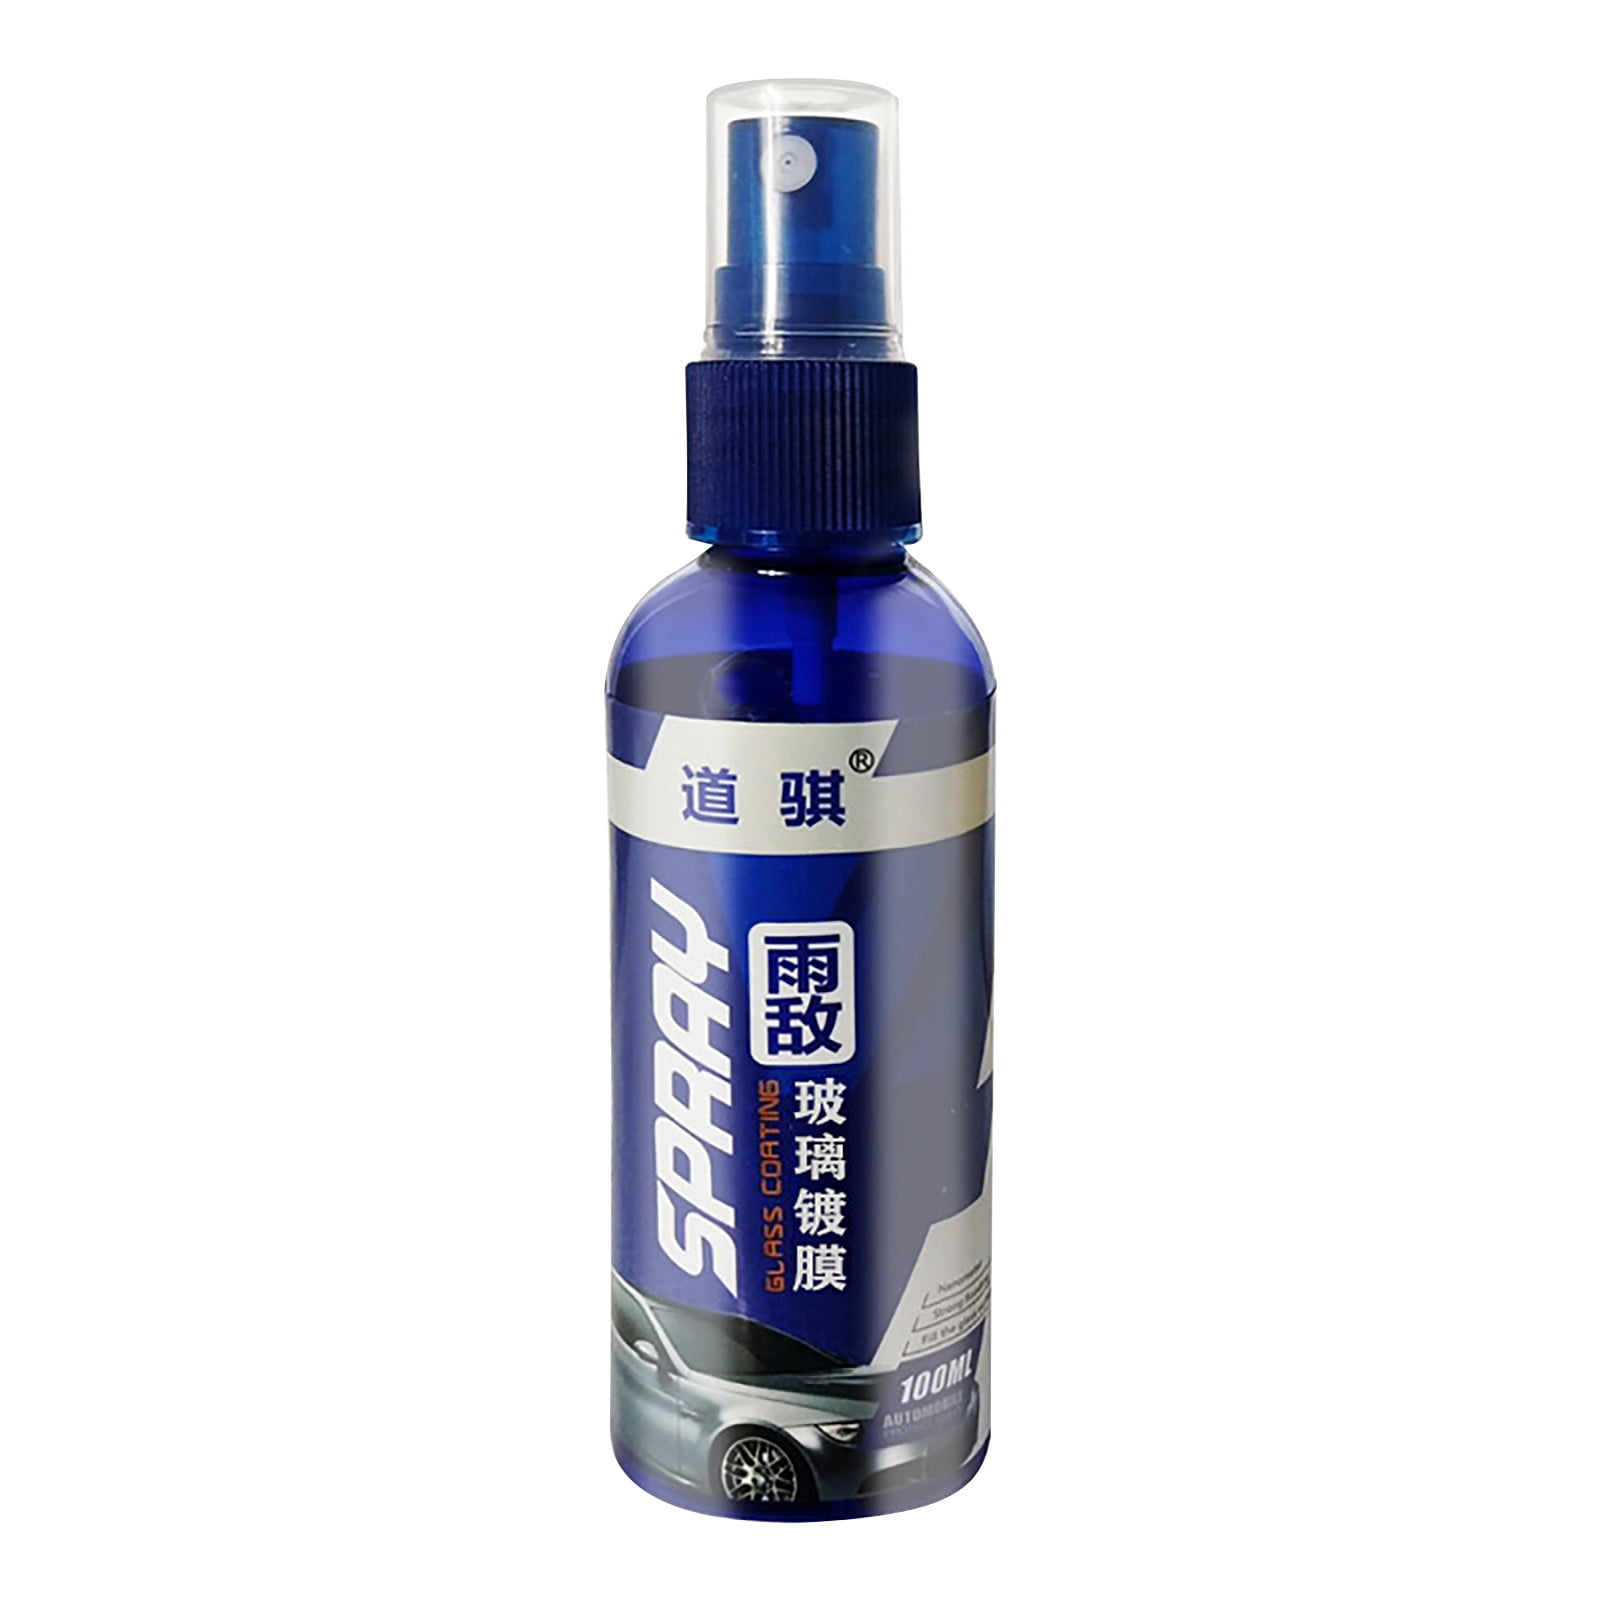 Zappy's Auto Washes Anti-Fog Glass Cleaner & Protectant